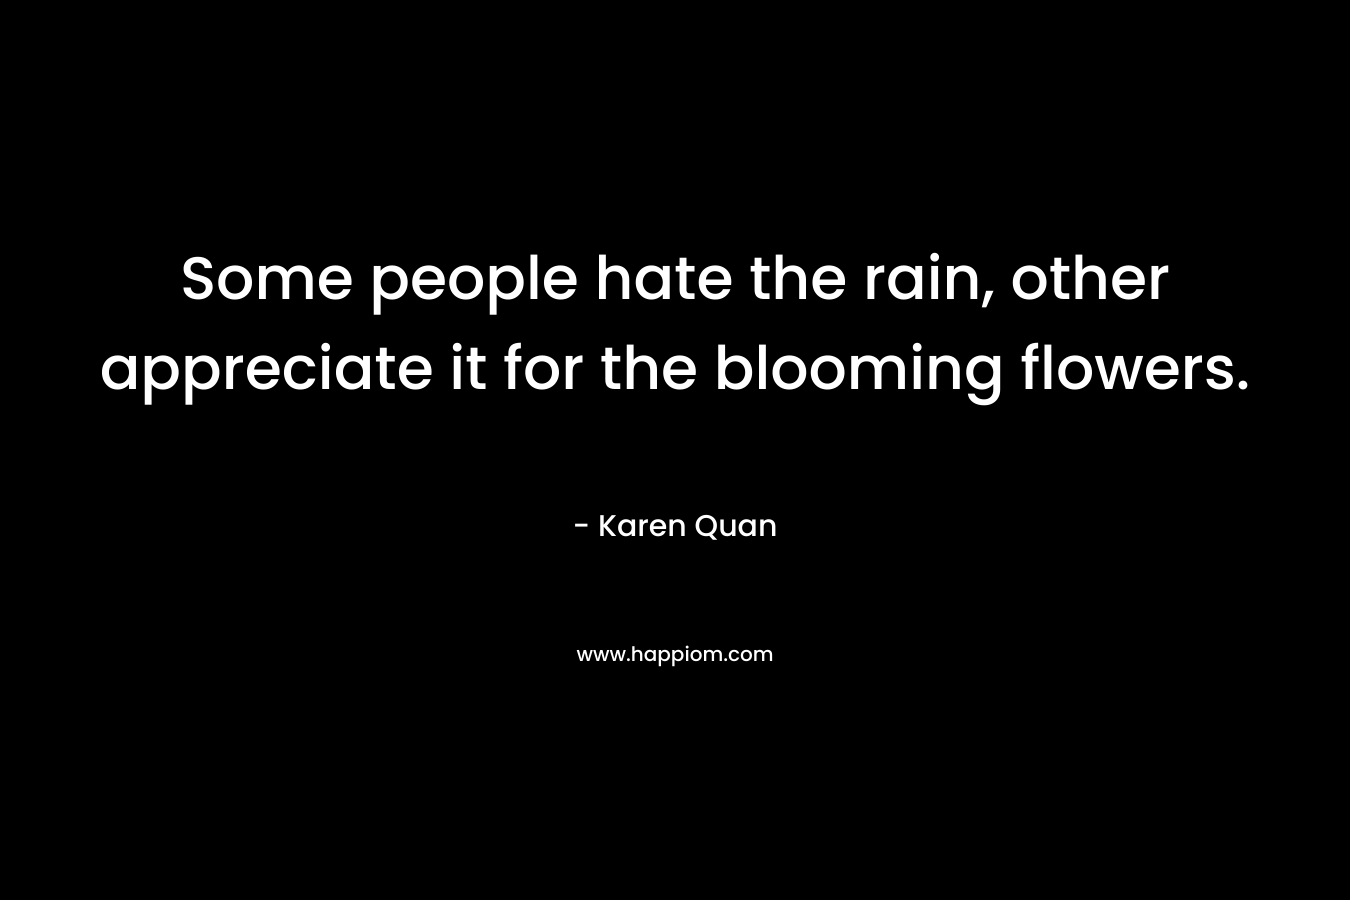 Some people hate the rain, other appreciate it for the blooming flowers.